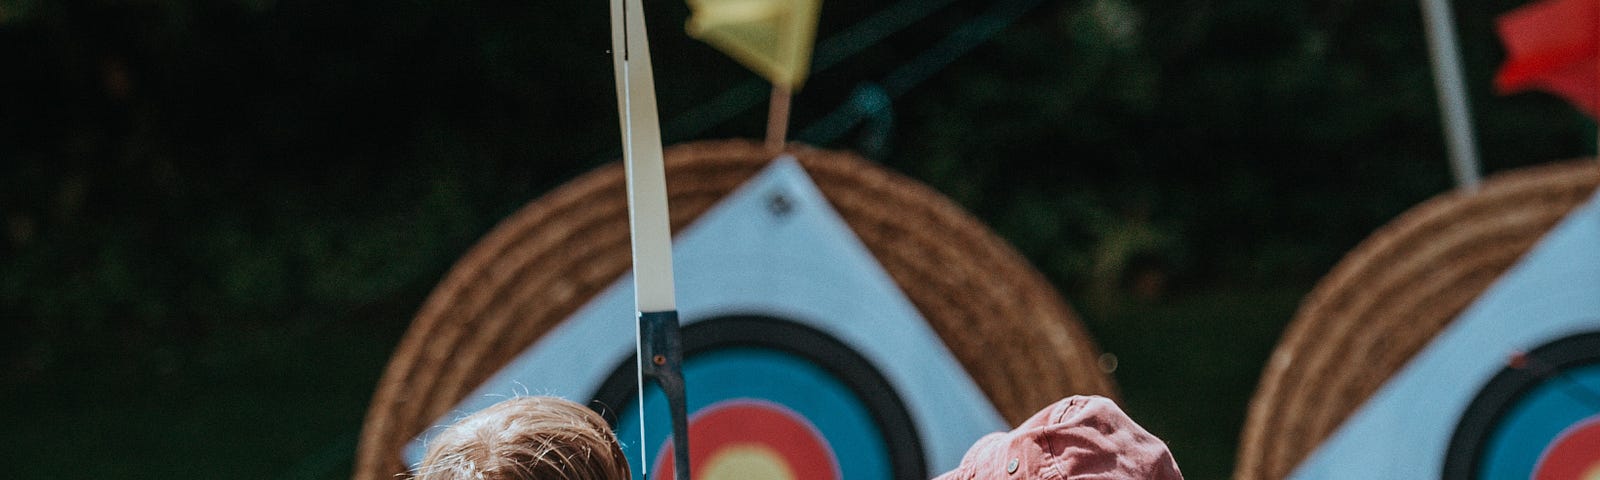 Mother shows a child to aim at the bow at the target before shooting — Photo by Annie Spratt on Unsplash